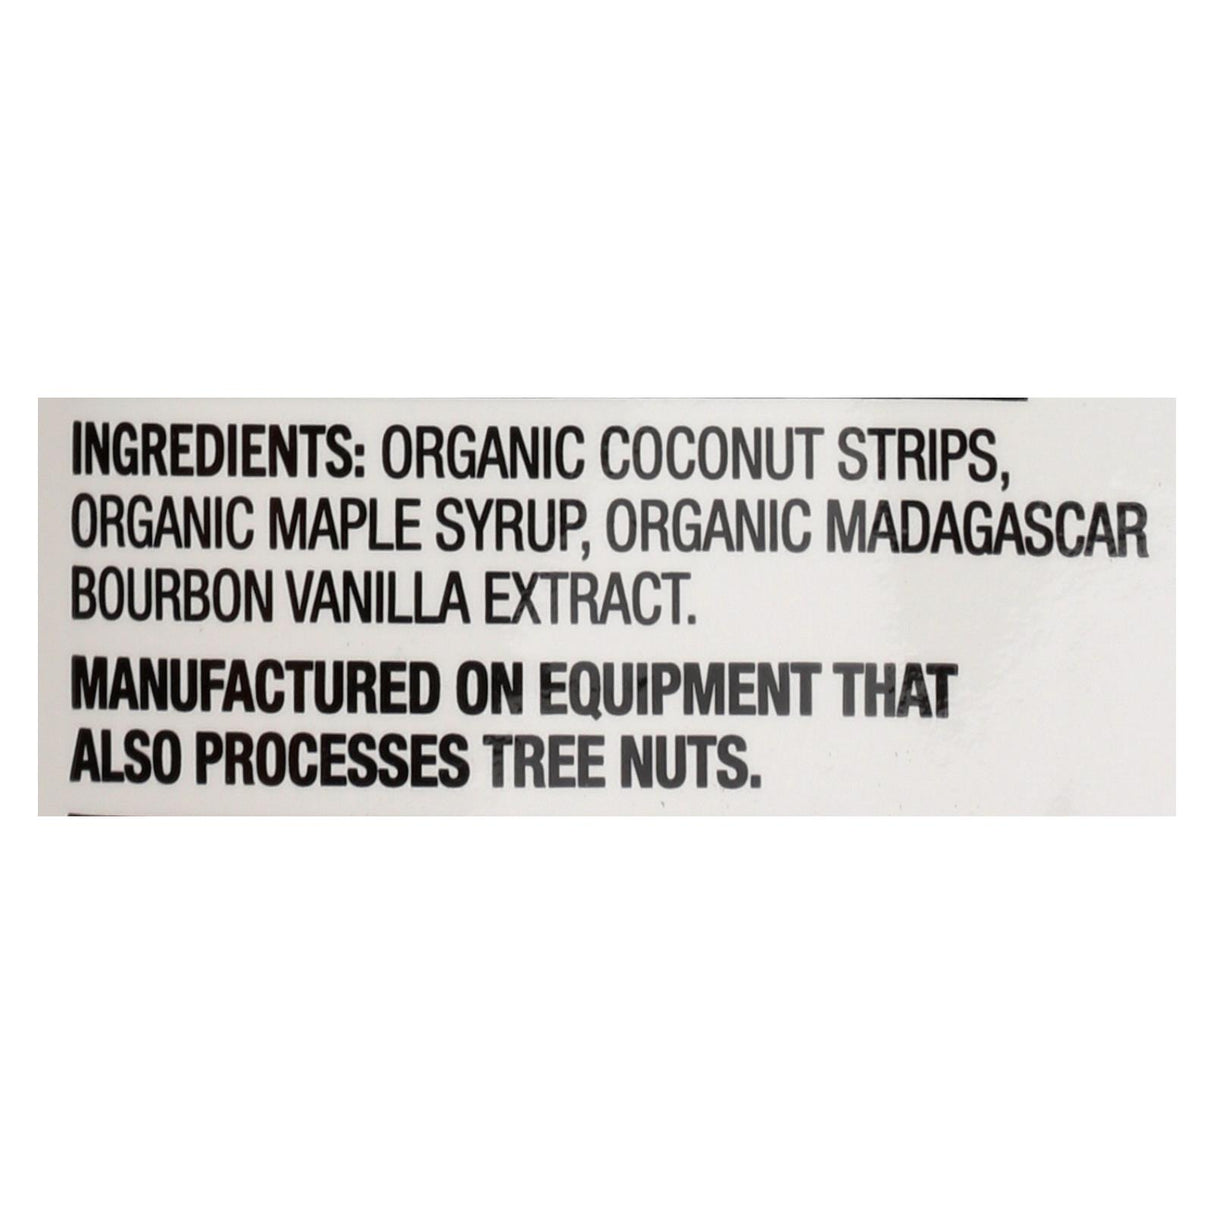 Made In Nature Organic Toasted Coconut Chips Maple Madagascar Vanilla (Pack of 6) 3 Oz - Cozy Farm 